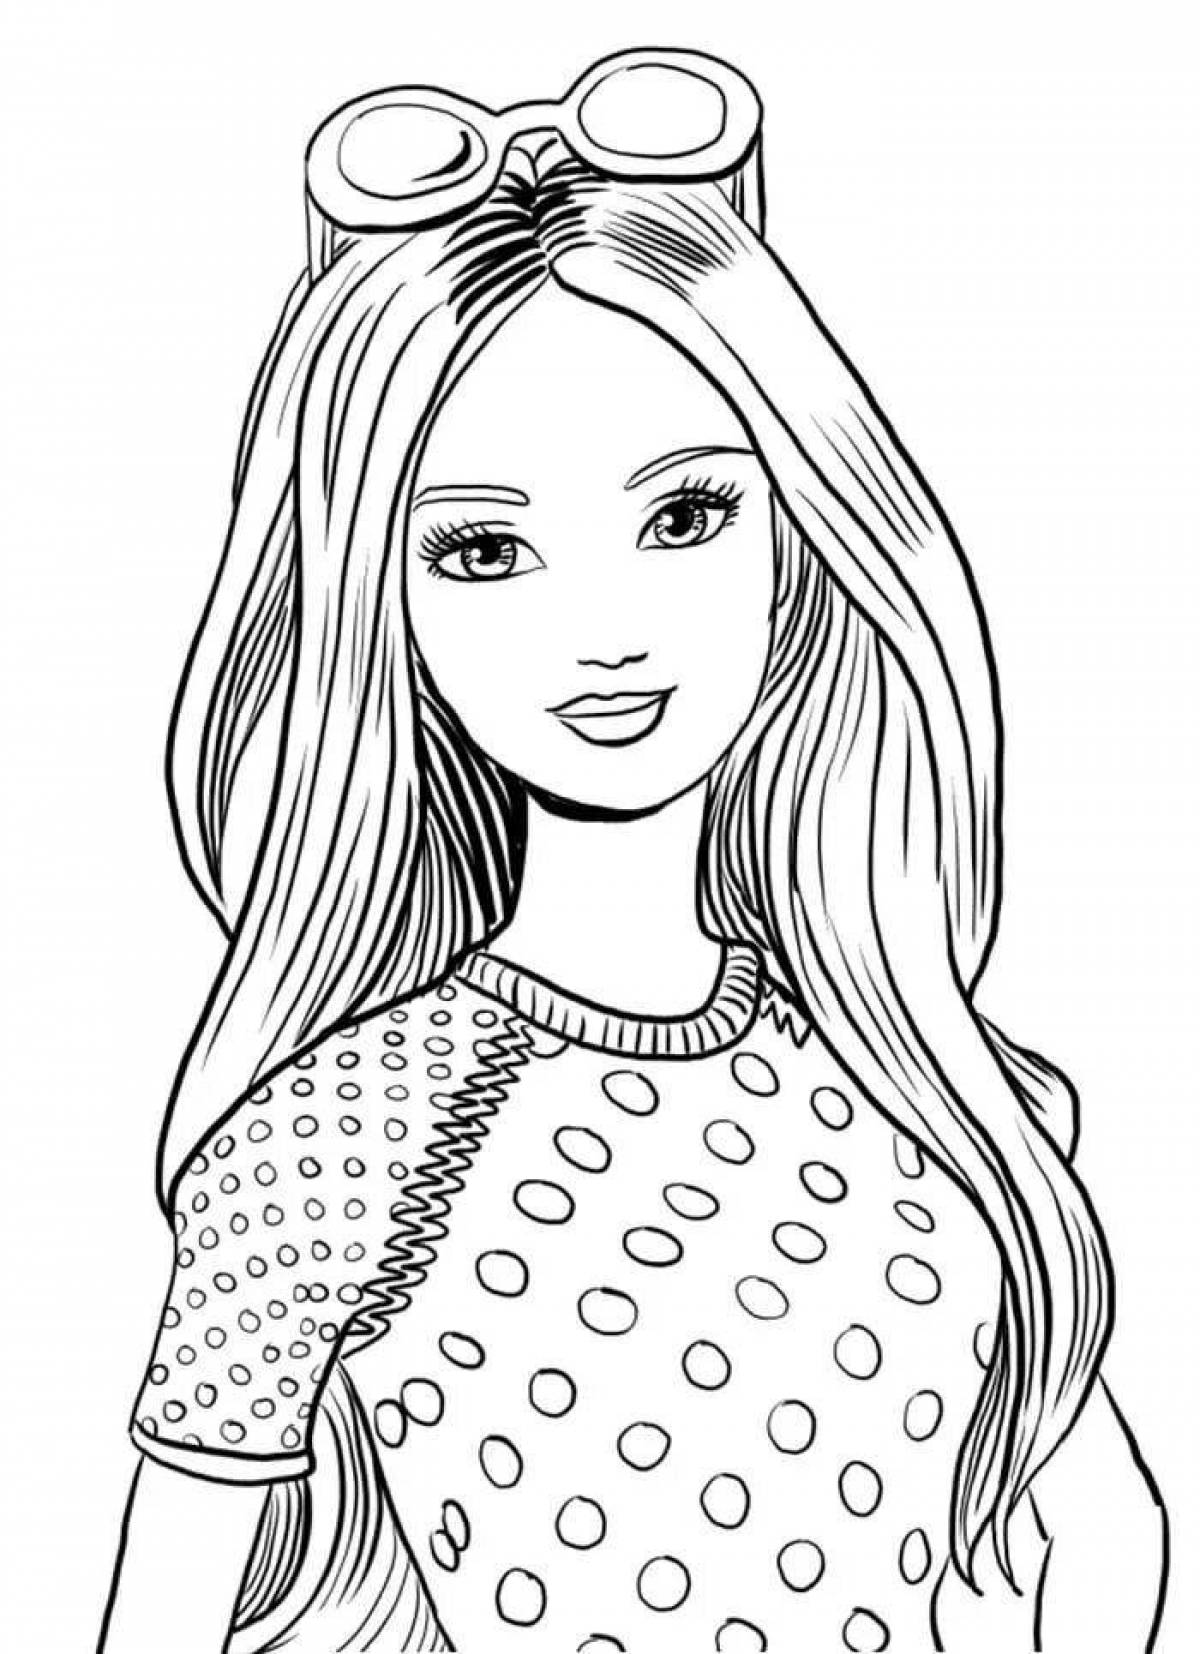 Outstanding barbie face coloring page